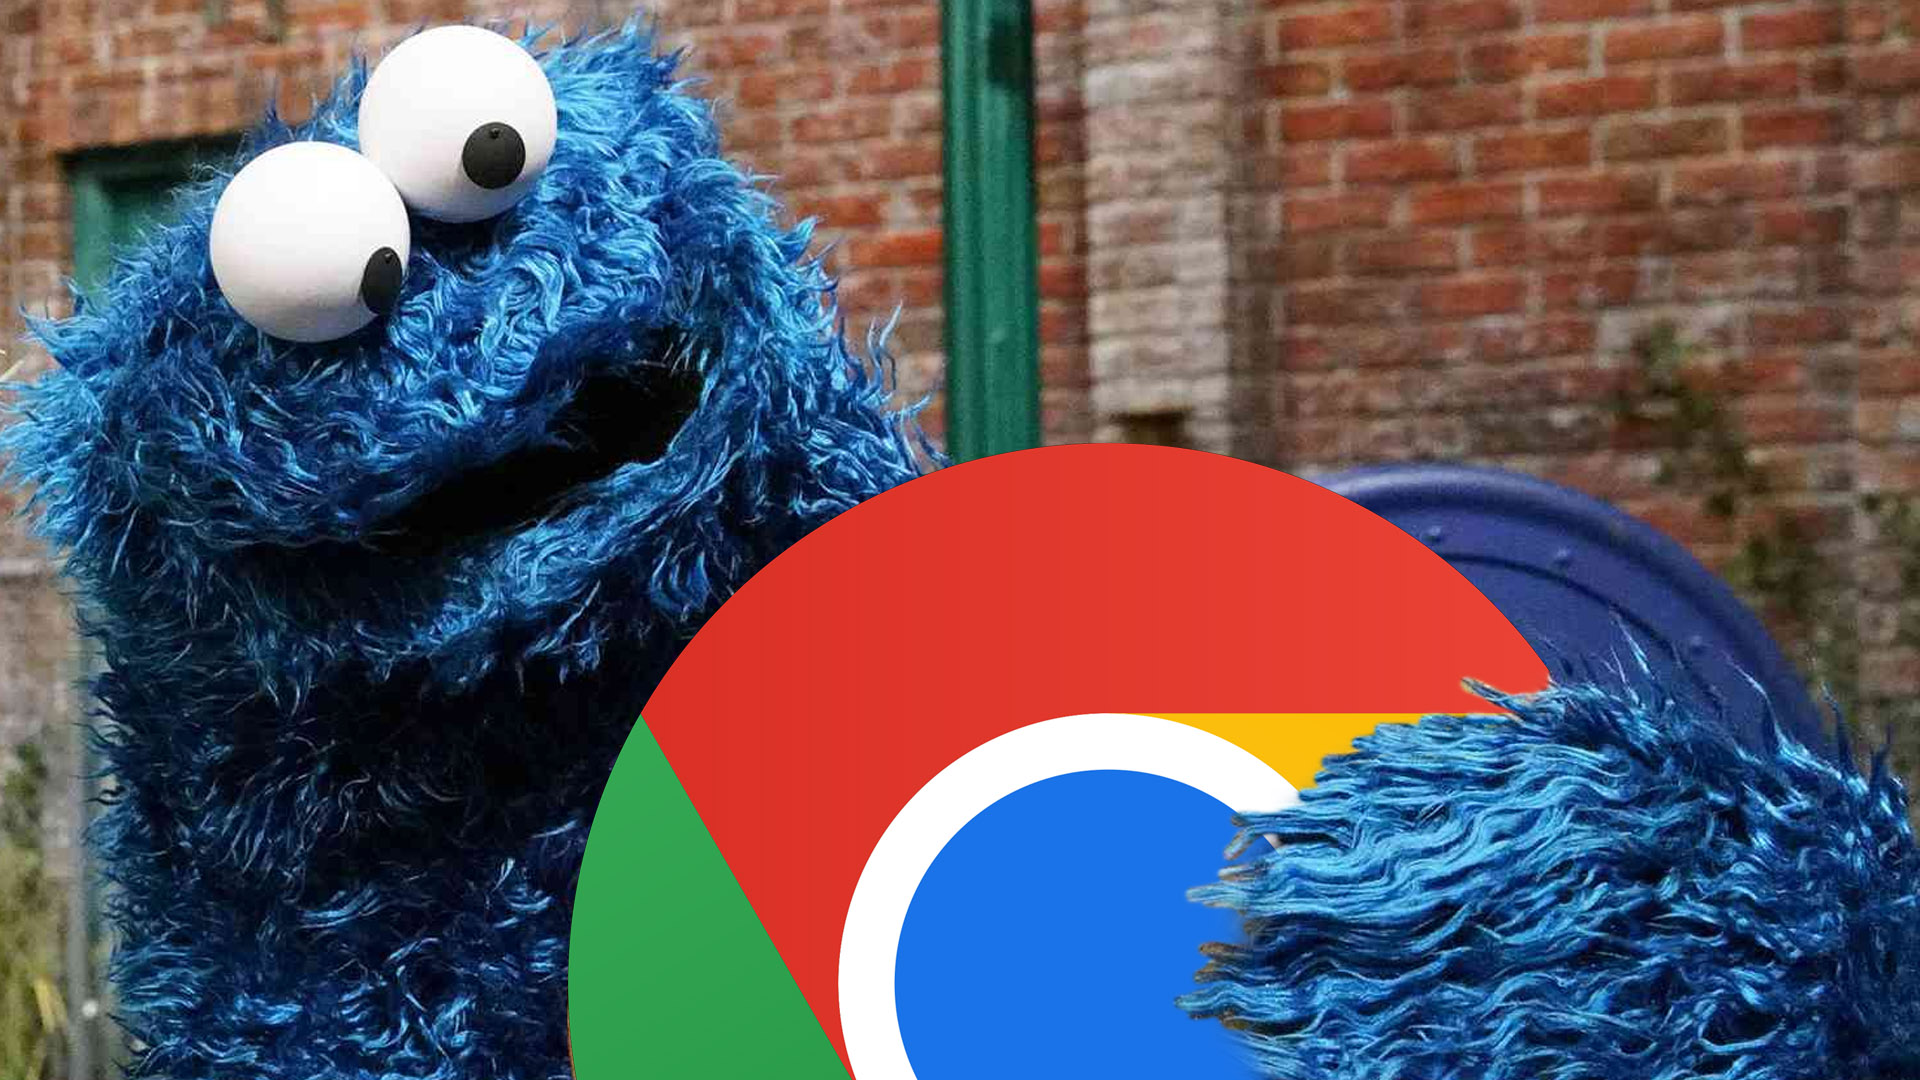 Chrome’s most up-to-the-minute aim blocks cookie-stealing hackers